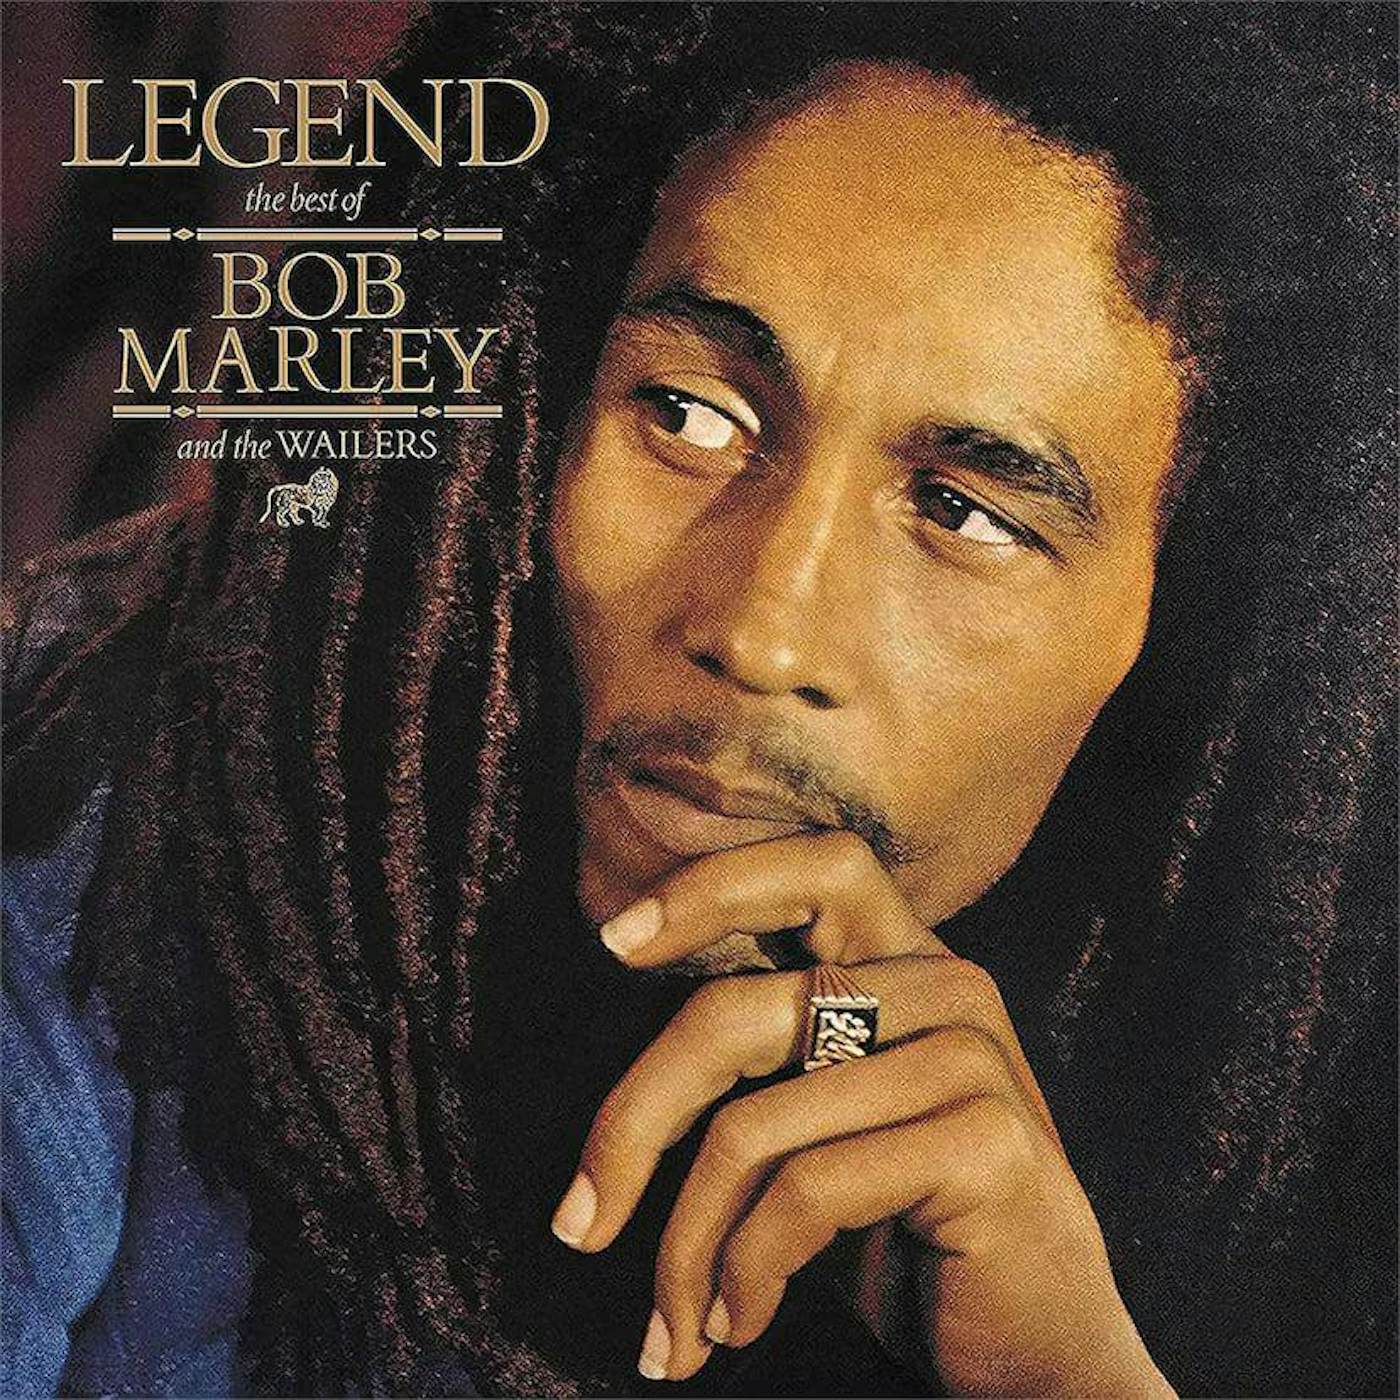 Legend: The Best Of Bob Marley & The Wailers Vinyl Record